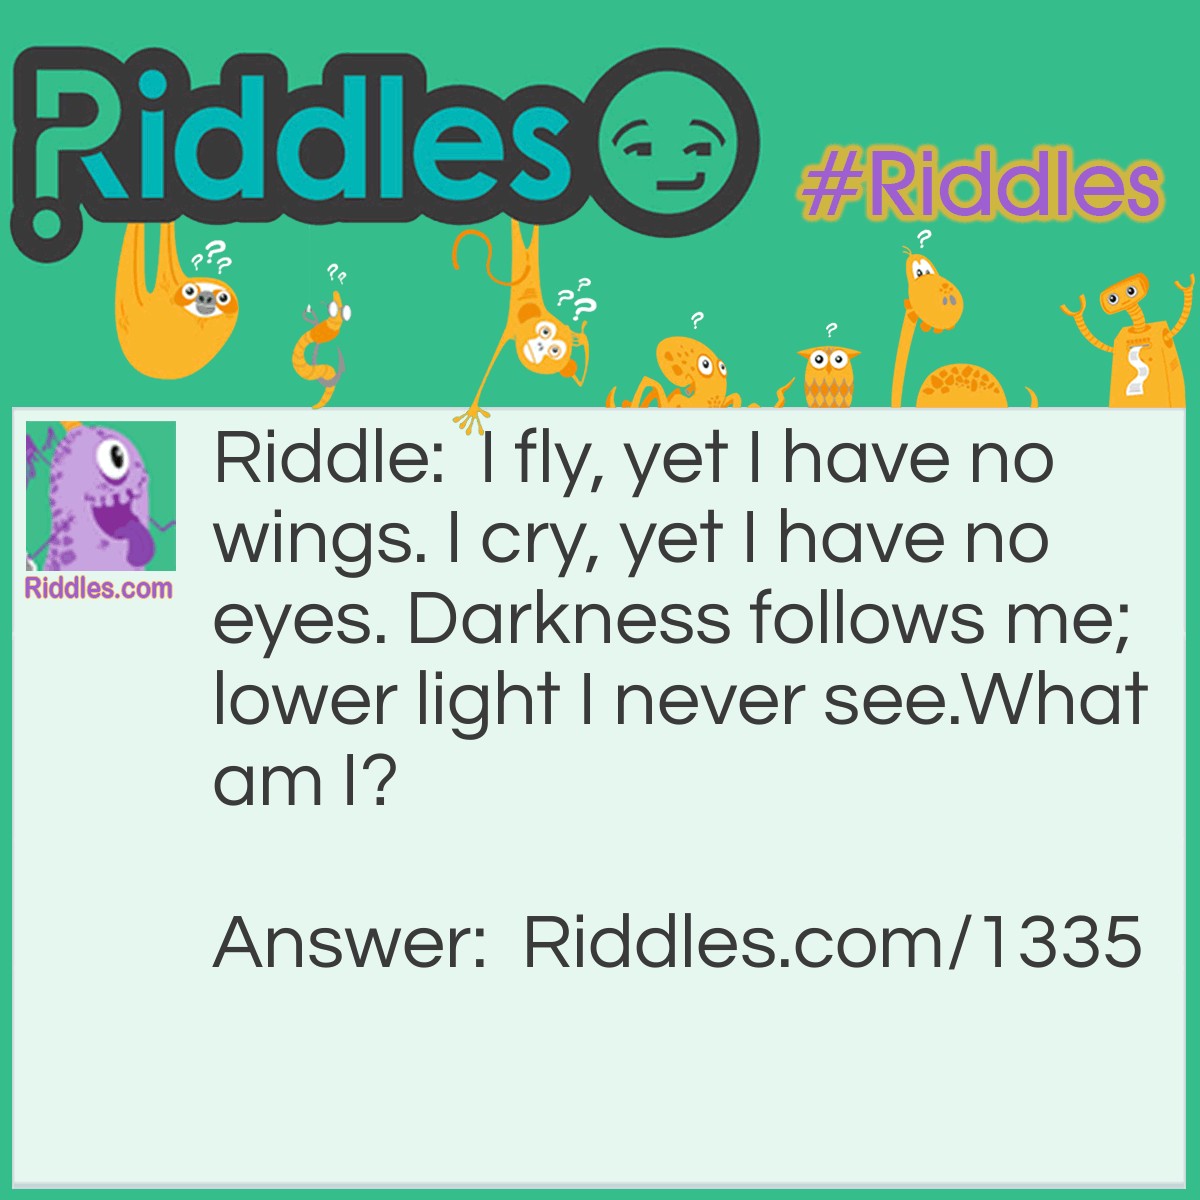 Riddle: I fly, yet I have no wings. I cry, yet I have no eyes. Darkness follows me; lower light I never see.
What am I? Answer: A cloud.